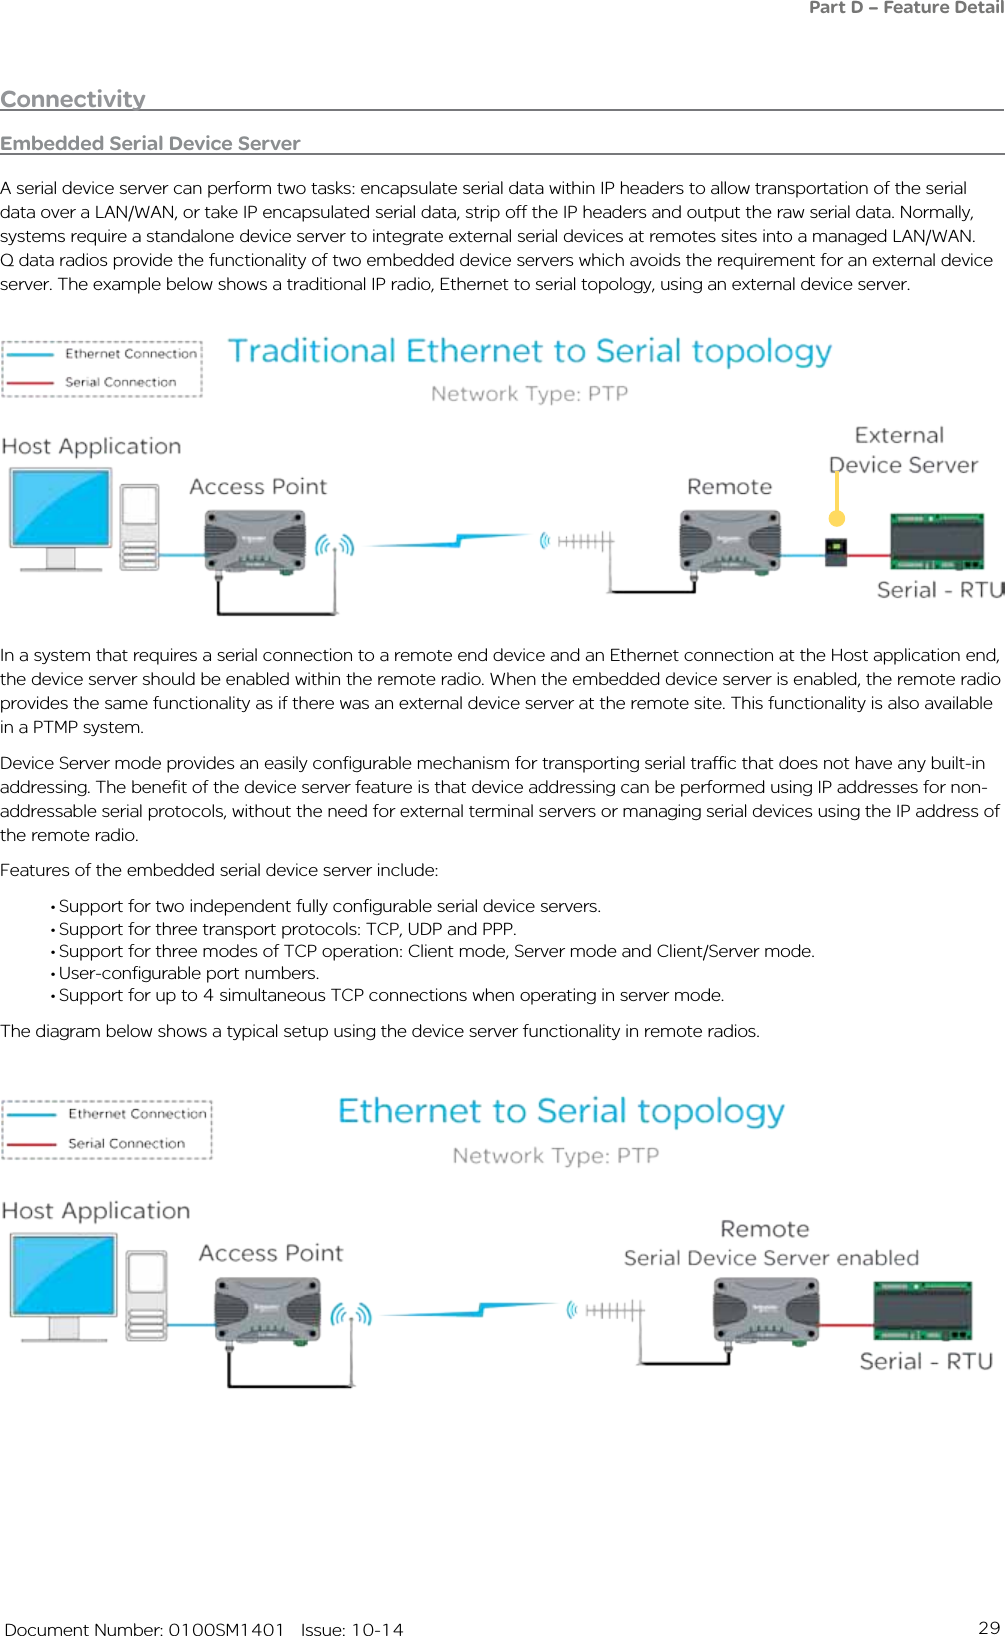 29   Document Number: 0100SM1401   Issue: 10-14ConnectivityEmbedded Serial Device ServerA serial device server can perform two tasks: encapsulate serial data within IP headers to allow transportation of the serial data over a LAN/WAN, or take IP encapsulated serial data, strip off the IP headers and output the raw serial data. Normally, systems require a standalone device server to integrate external serial devices at remotes sites into a managed LAN/WAN. Q data radios provide the functionality of two embedded device servers which avoids the requirement for an external device server. The example below shows a traditional IP radio, Ethernet to serial topology, using an external device server.In a system that requires a serial connection to a remote end device and an Ethernet connection at the Host application end, the device server should be enabled within the remote radio. When the embedded device server is enabled, the remote radio provides the same functionality as if there was an external device server at the remote site. This functionality is also available in a PTMP system.Device Server mode provides an easily configurable mechanism for transporting serial traffic that does not have any built-in addressing. The benefit of the device server feature is that device addressing can be performed using IP addresses for non-addressable serial protocols, without the need for external terminal servers or managing serial devices using the IP address of the remote radio. Features of the embedded serial device server include:•Support for two independent fully configurable serial device servers.•Support for three transport protocols: TCP, UDP and PPP.•Support for three modes of TCP operation: Client mode, Server mode and Client/Server mode.•User-configurable port numbers.•Support for up to 4 simultaneous TCP connections when operating in server mode.The diagram below shows a typical setup using the device server functionality in remote radios. Part D – Feature Detail